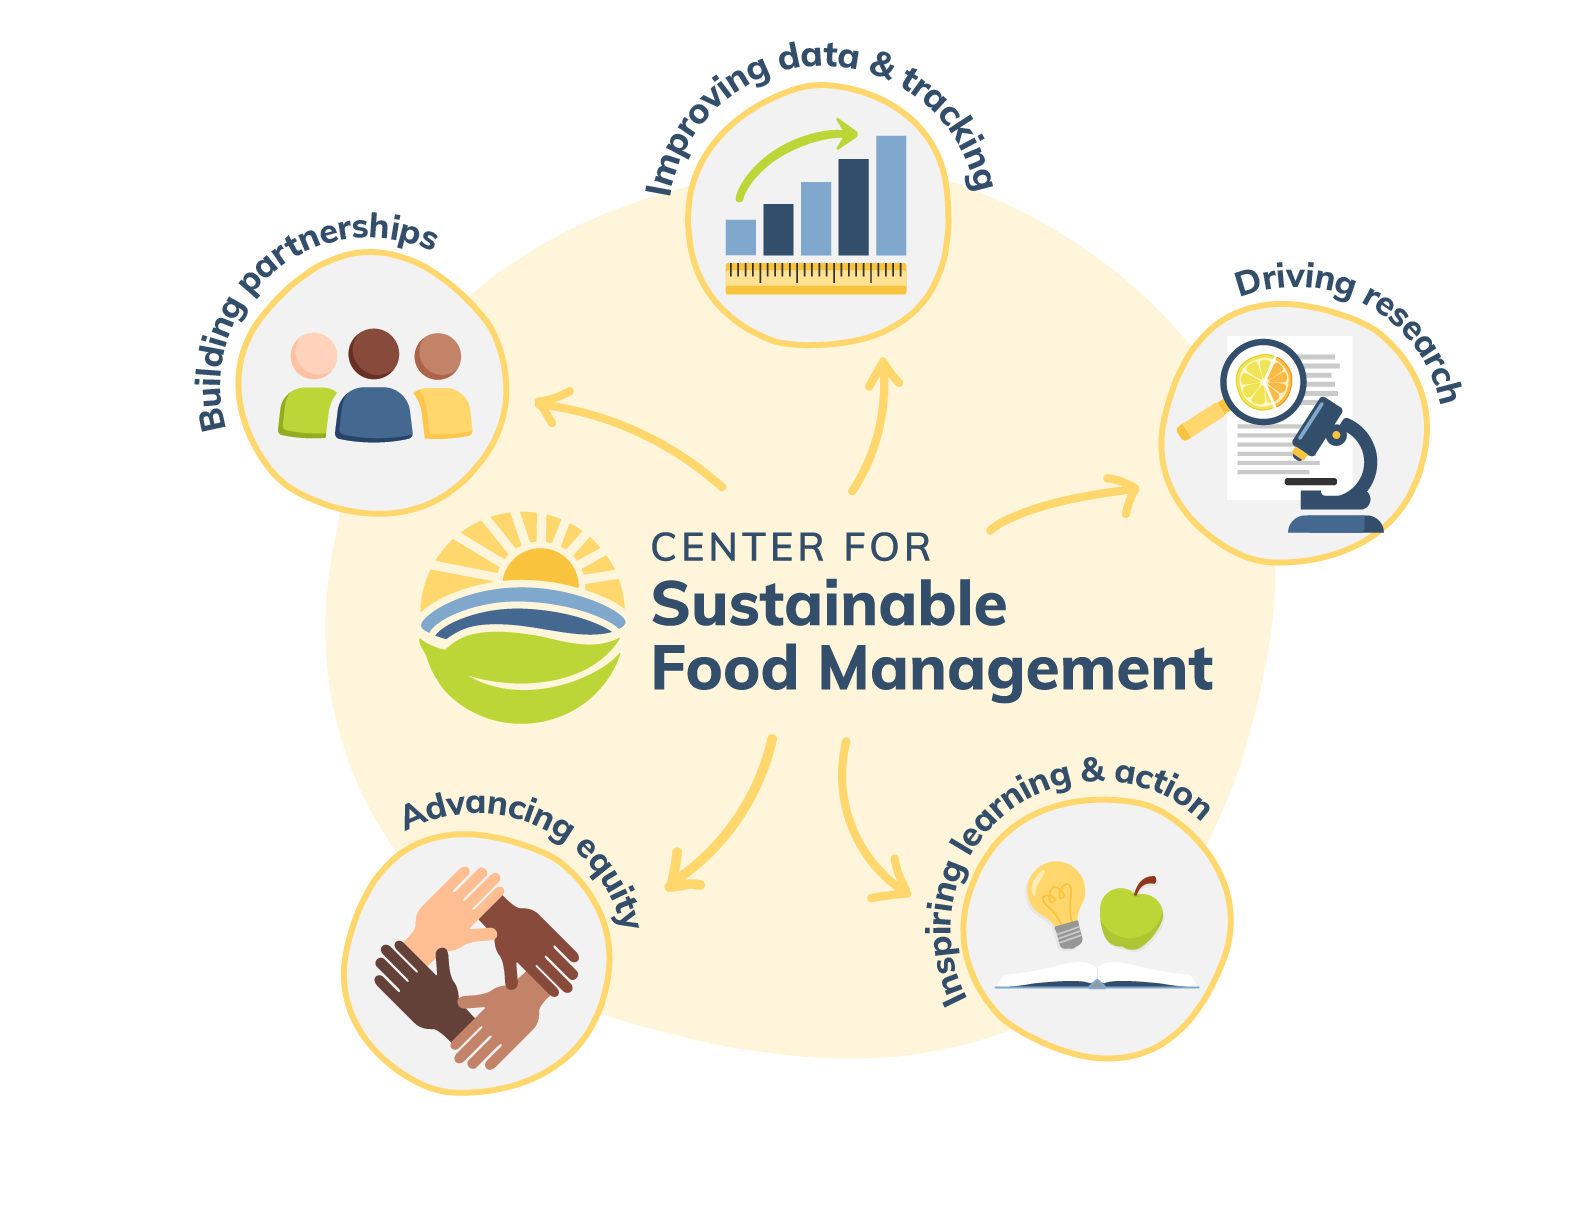 The Right for Sustainable Food Management will focus on five areas: Advancing equity,  Building partnerships,  Improving data and tracking,  Driving research,  Inspiring learning and action. 